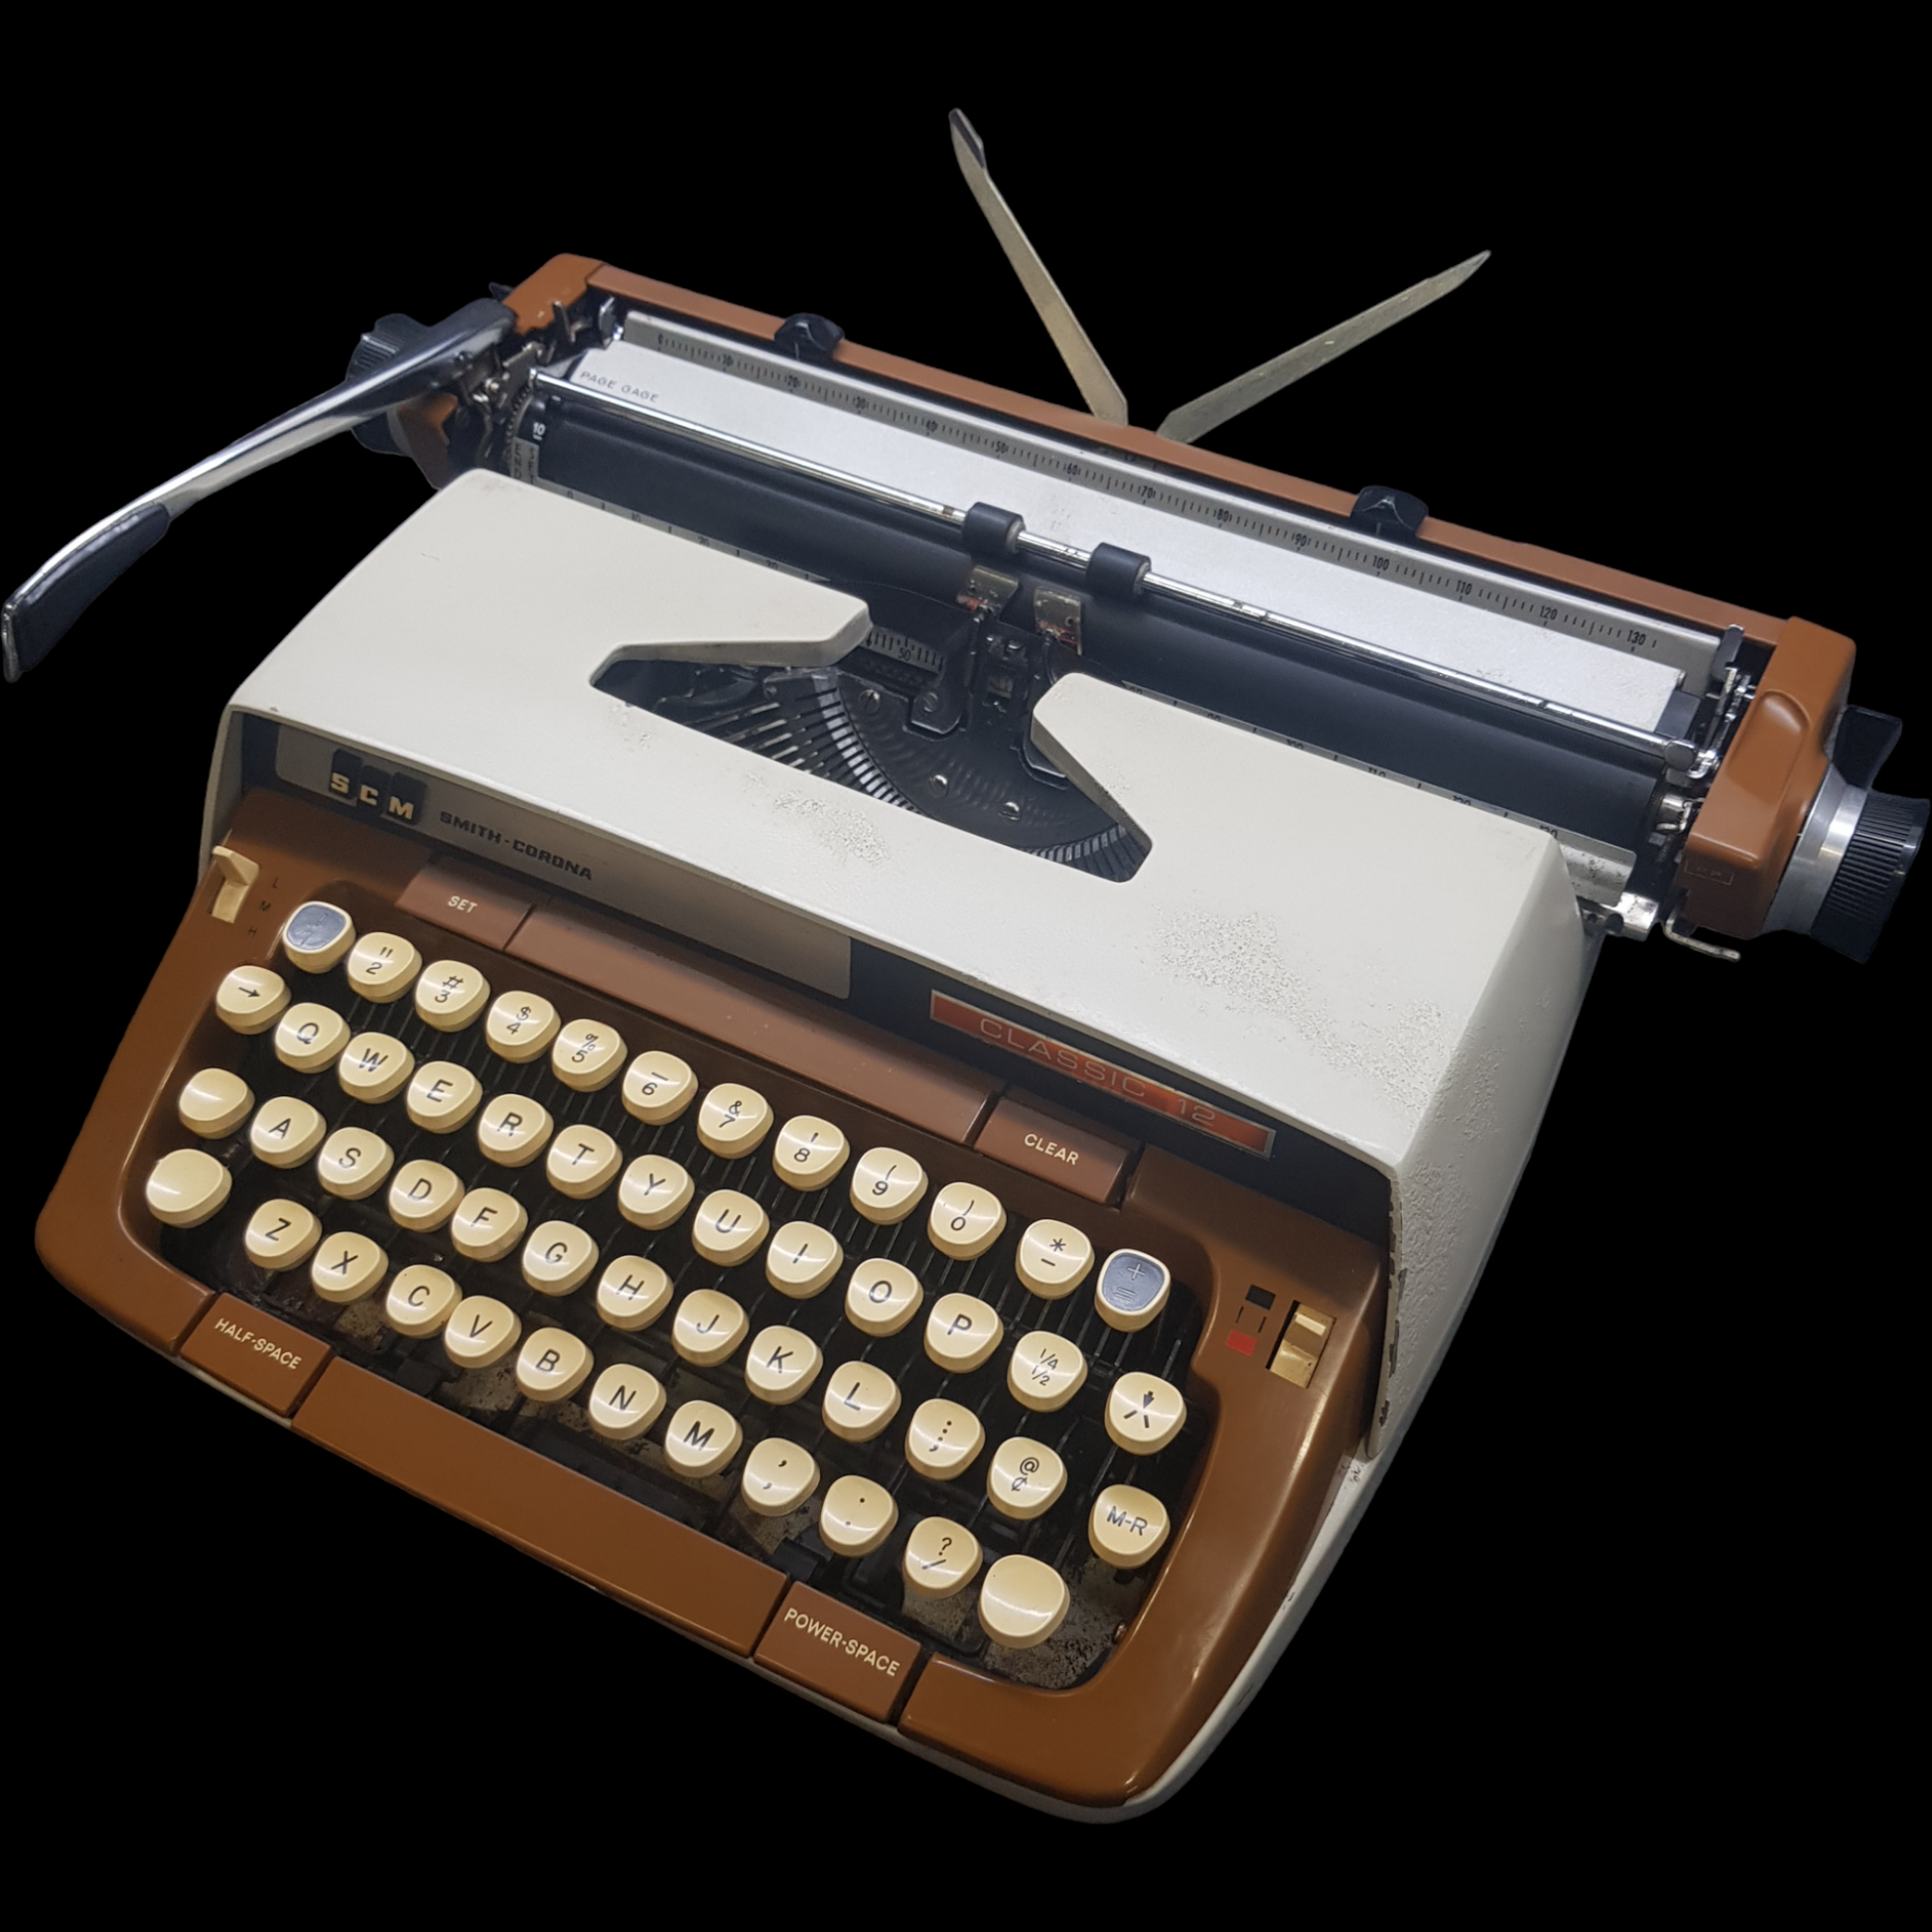 Image of SCM Smith Corona Classic Typewriter. A Big Portable typewriter. Made in the USA. Available from Universal Typewriter Company.